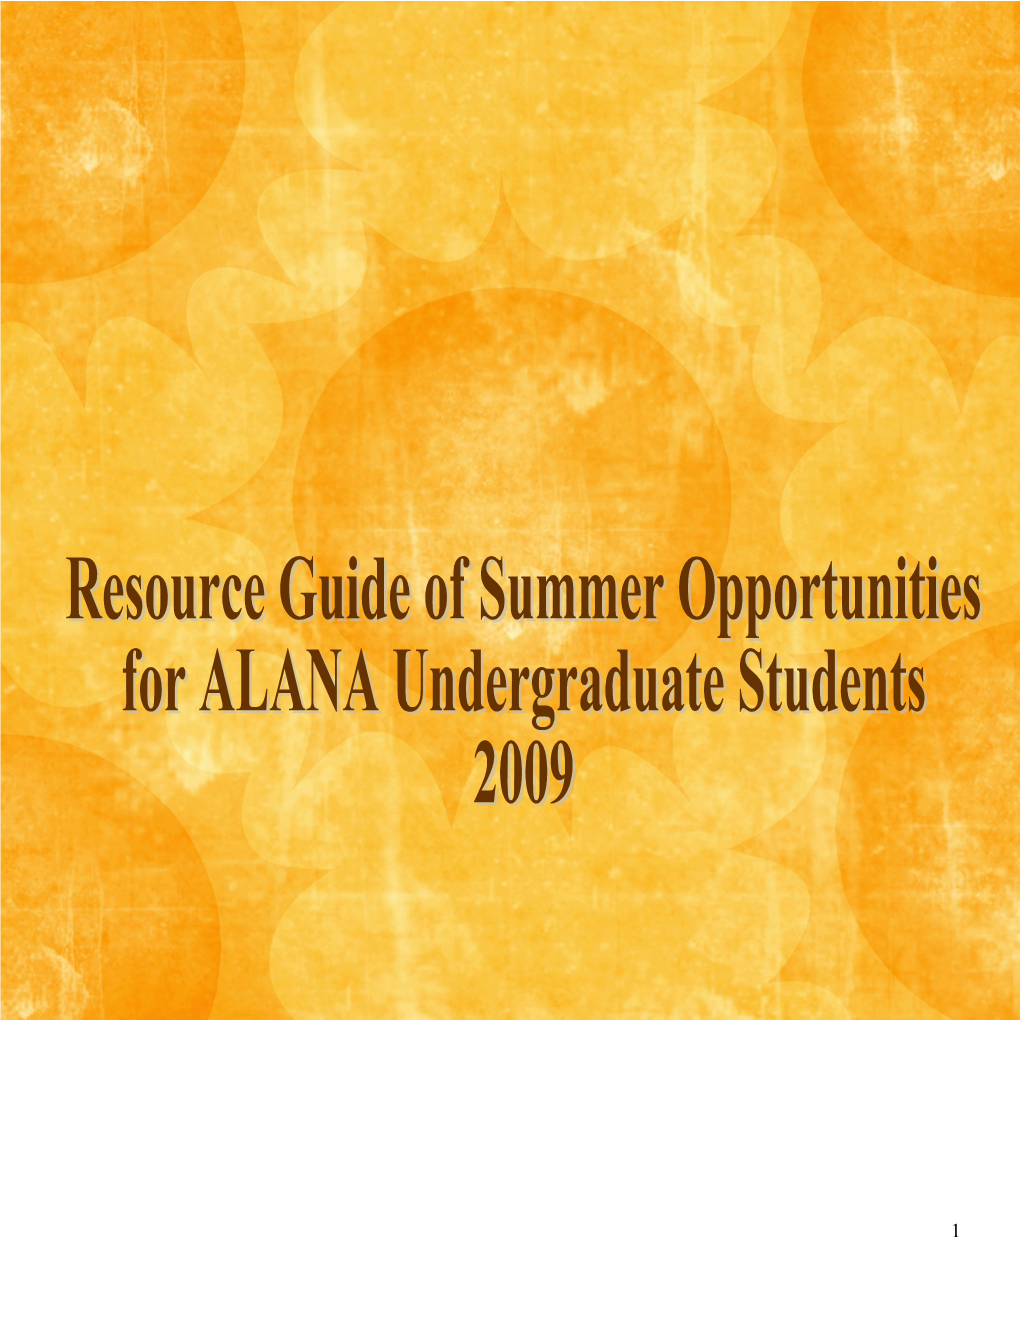 Thank You for Seeking out the 8Th Annual Edition of the Resource Guide of Summer Opportunities